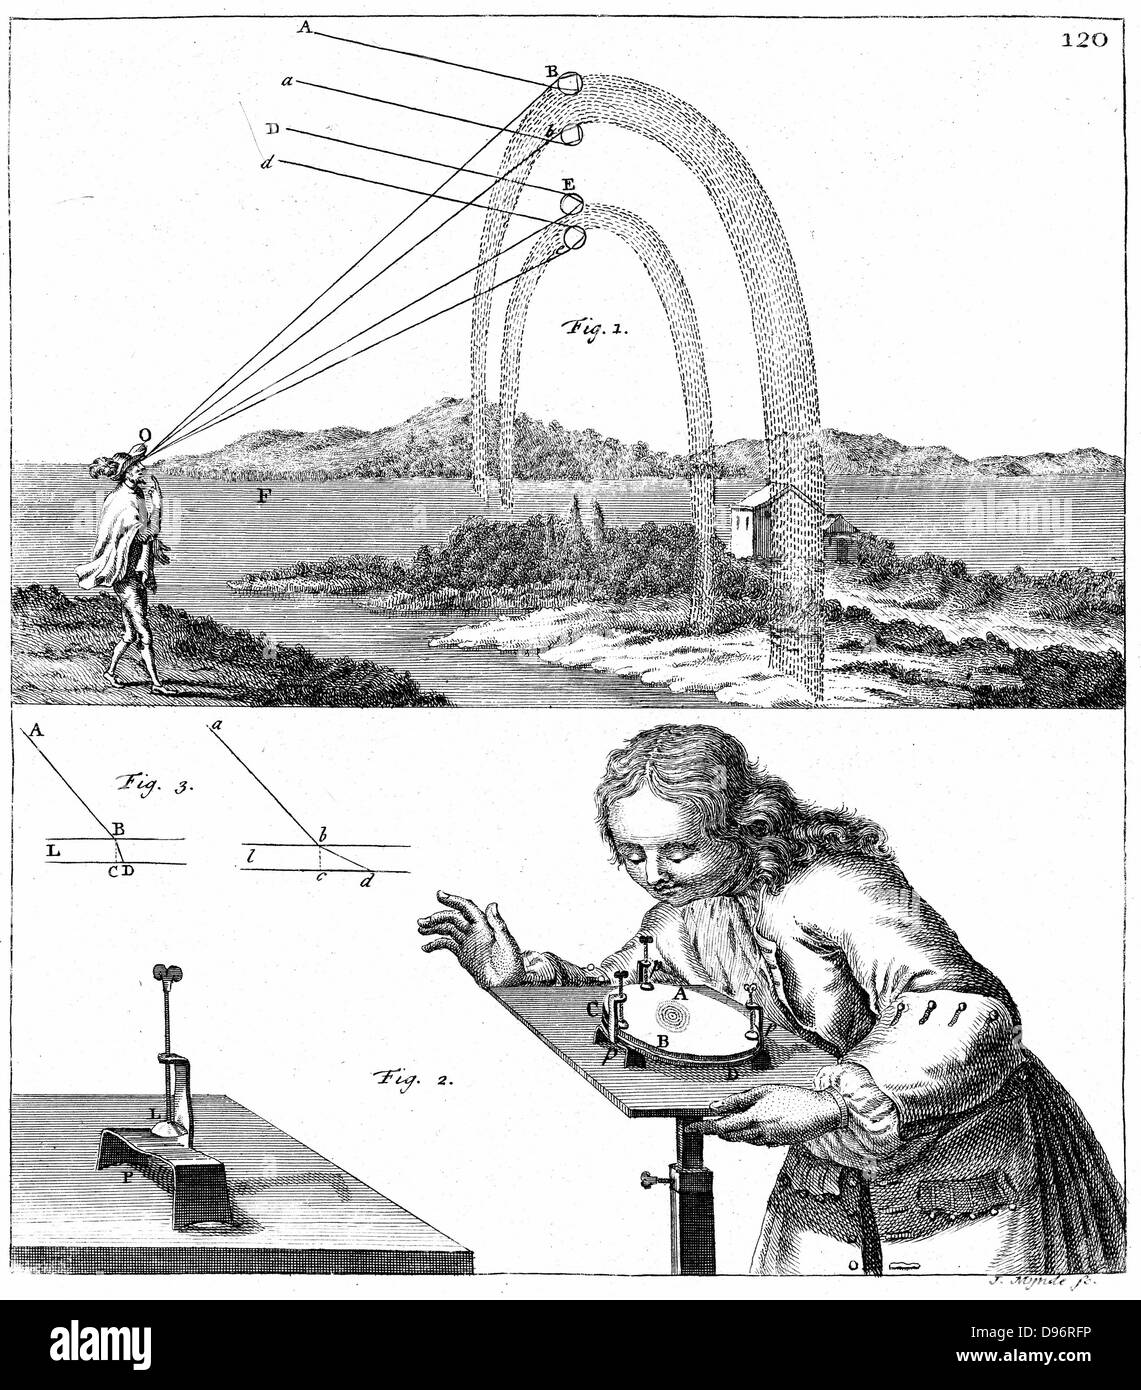 Formation of rainbow by dispersion and total internal reflection (top). Observing Newton's Rings (circular concentric interference fringes). From WJ Gravesande 'Physices Elementa Mathematica' London 1725, a 'popular' explanation of his friend  Newton's 'Principia'. Copperplate engraving. Stock Photo